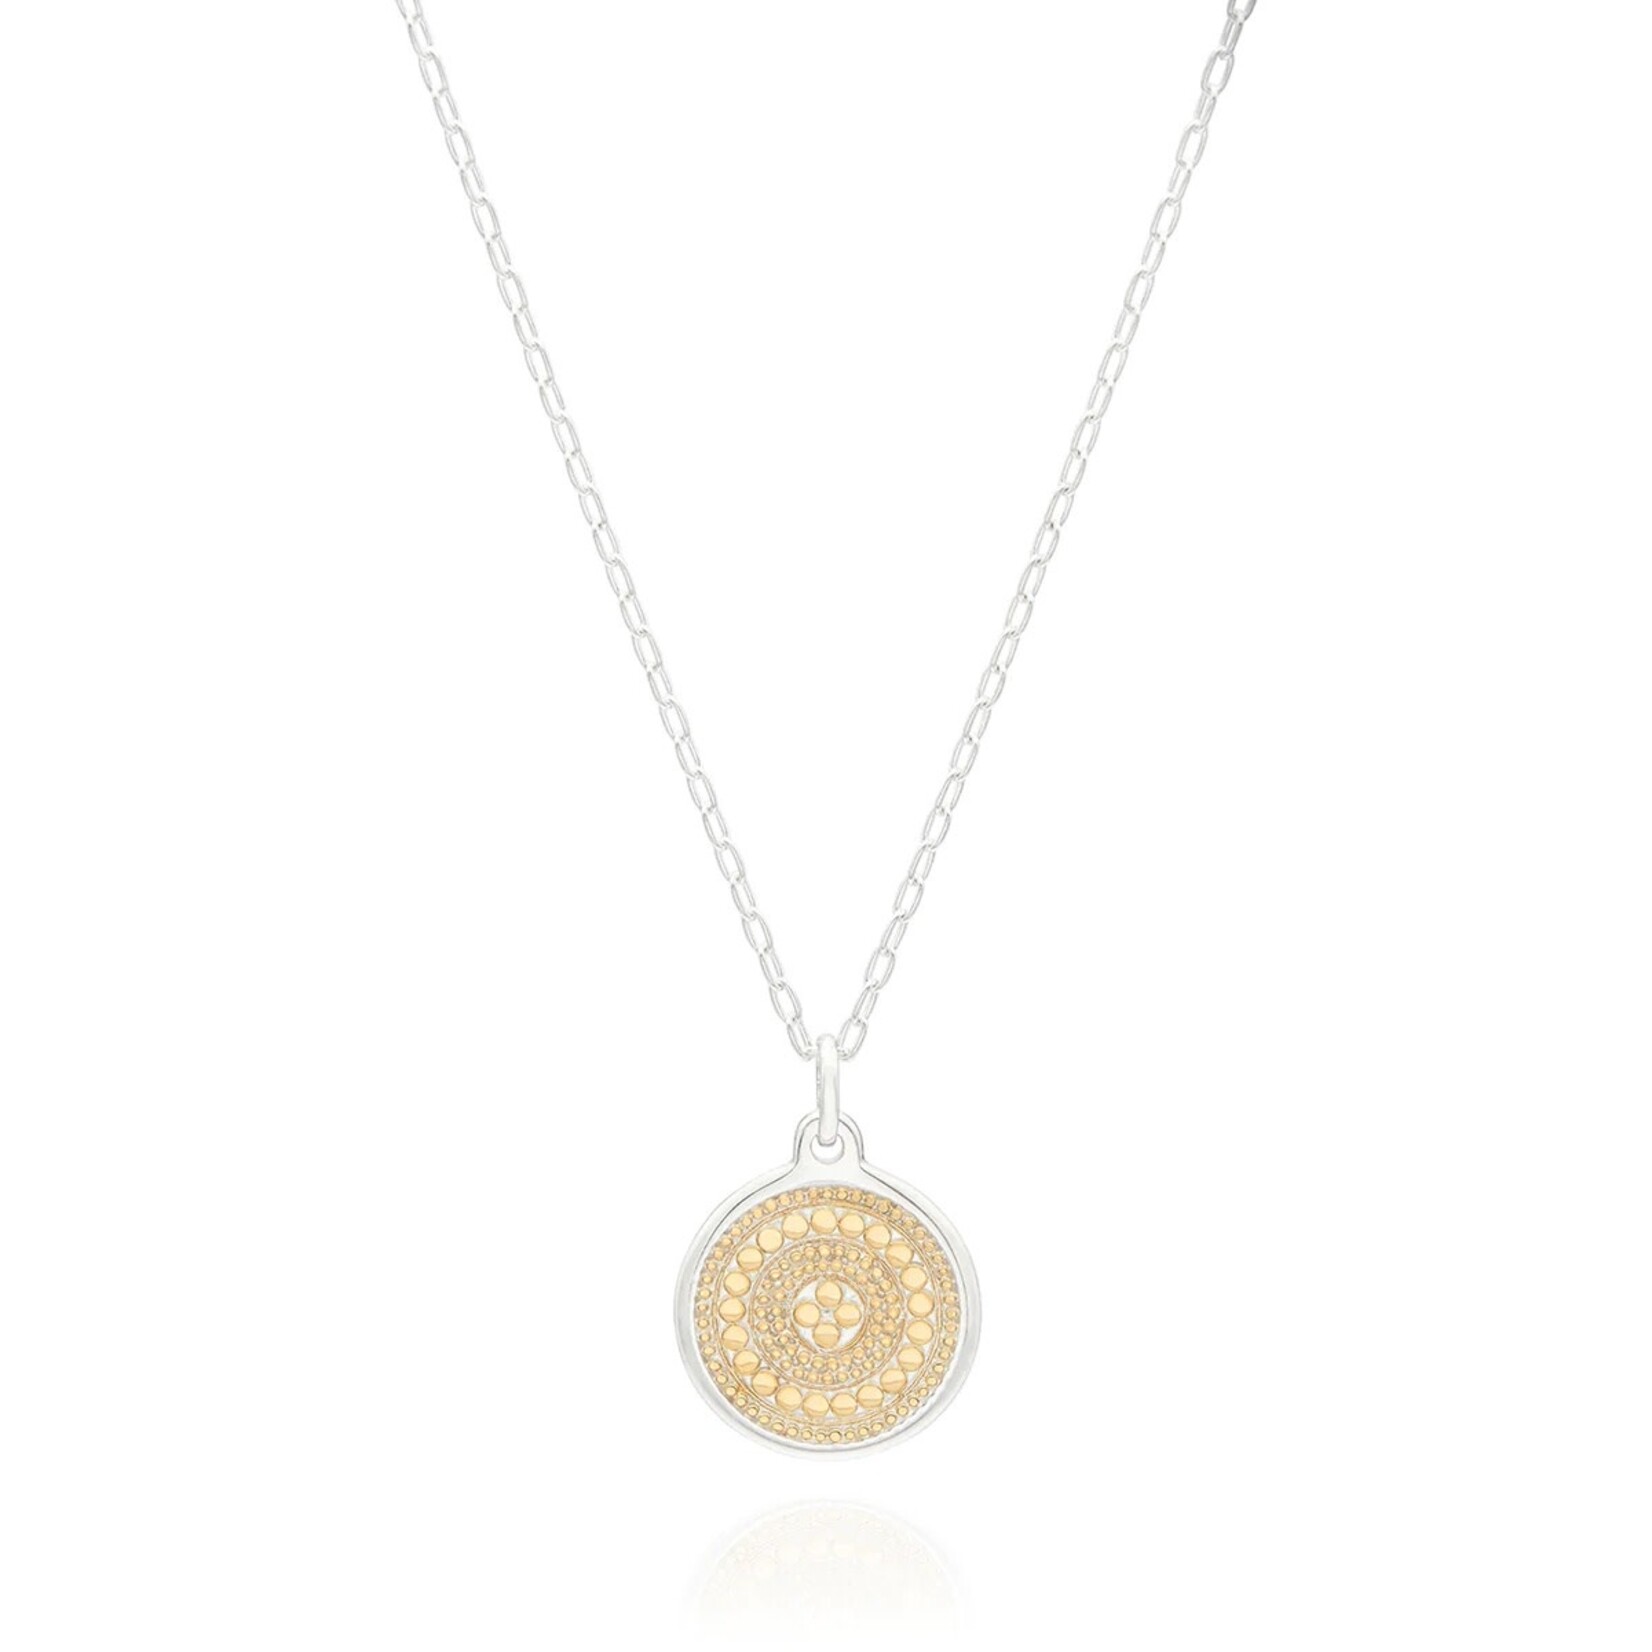 Sterling Silver & 18K Yellow Gold Overlay Medallion Charity Pendant